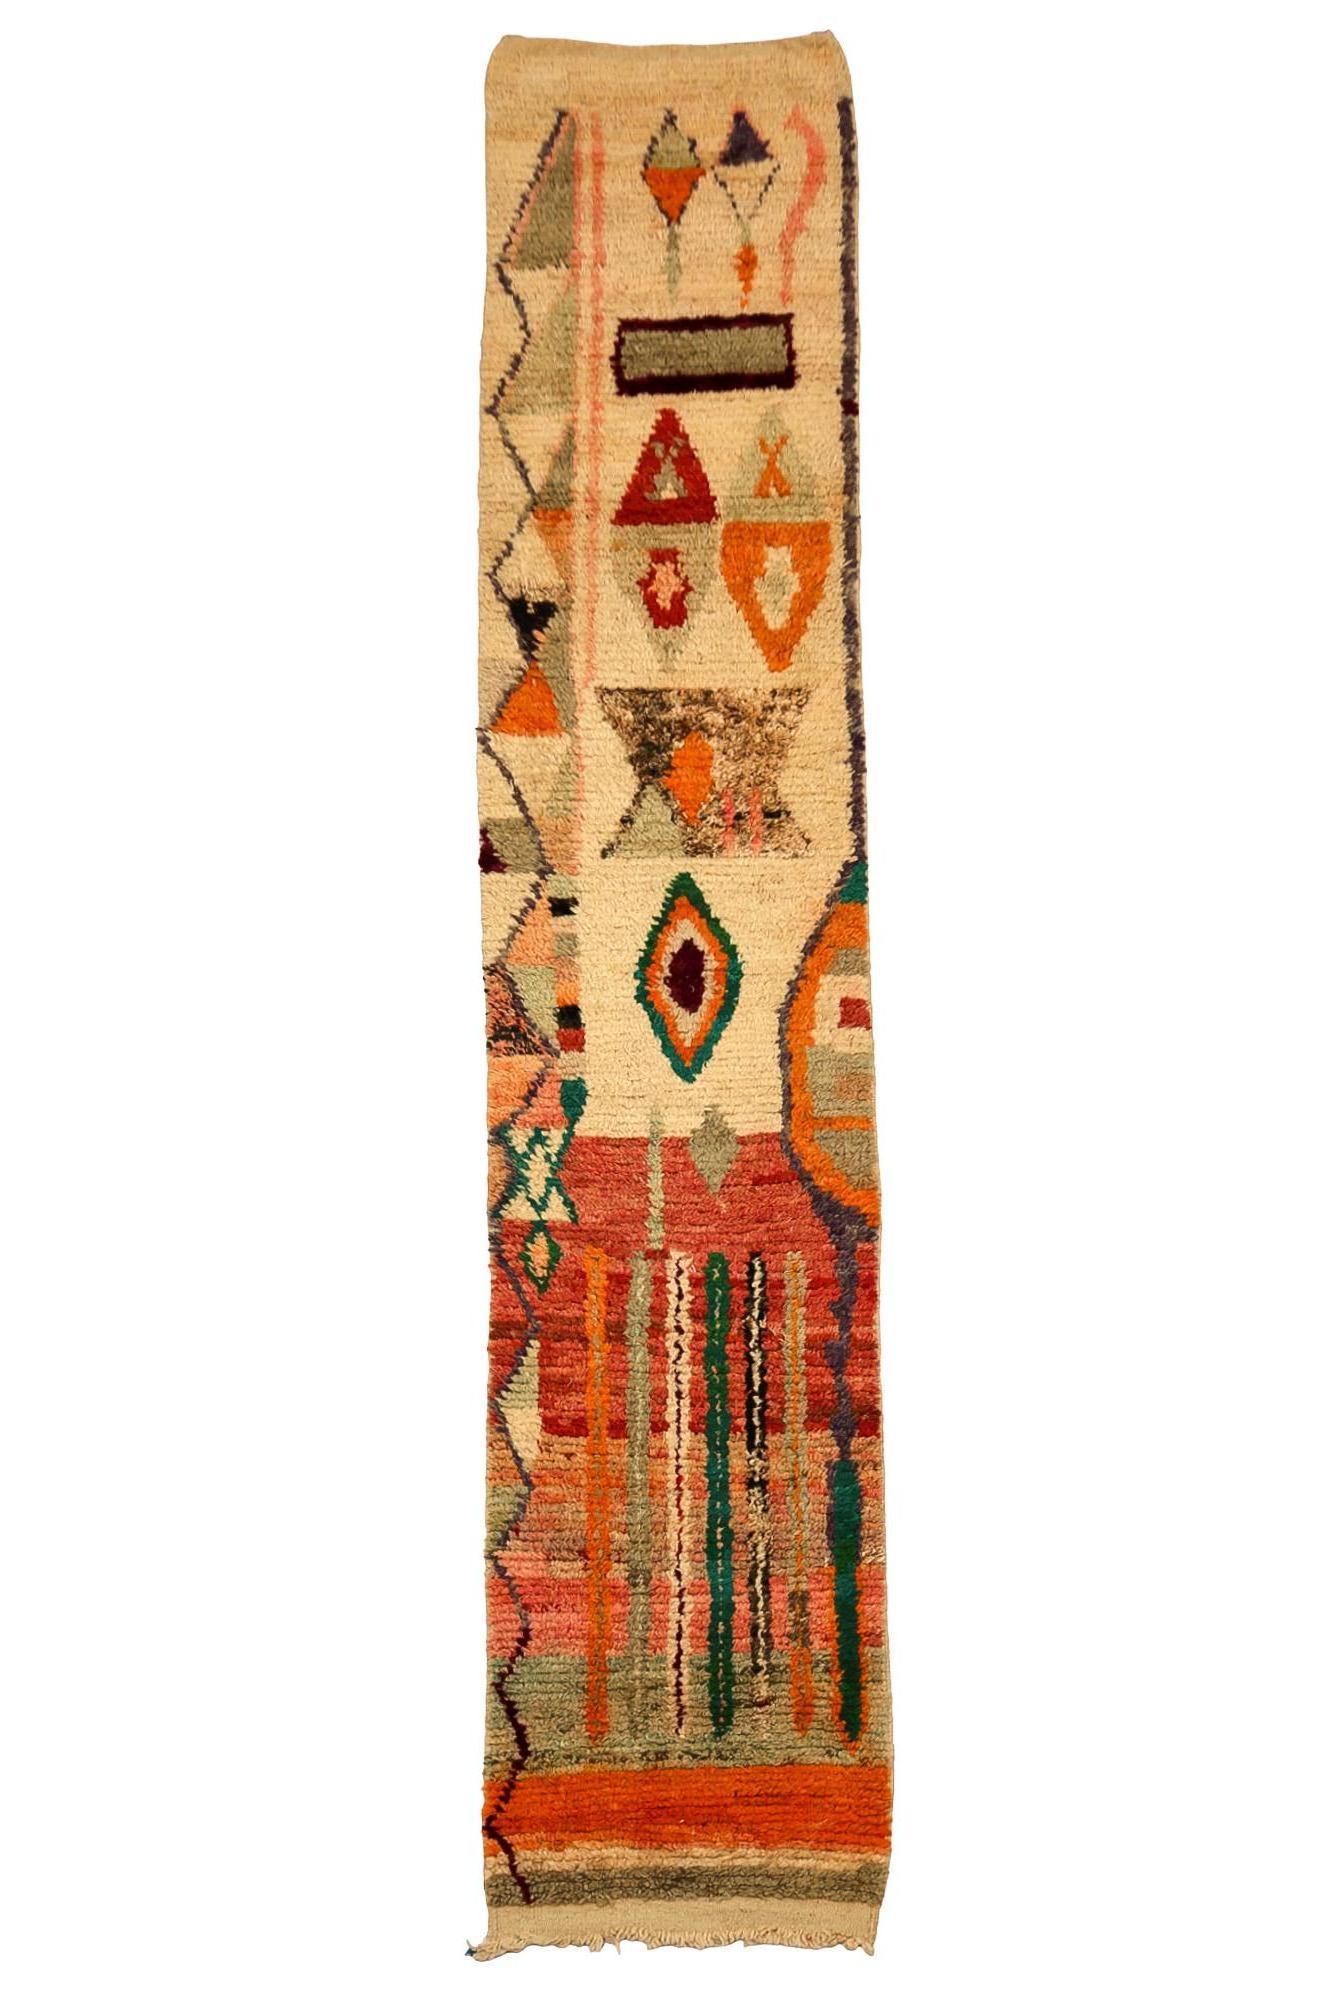 Boujaad runner comes from the El Haouz region in the Middle Atlas in Morocco. There is no modern weaving equipment, carpets are made manually by very talented ladies artists in the same way as several centuries ago. The main feature of Boujaad is